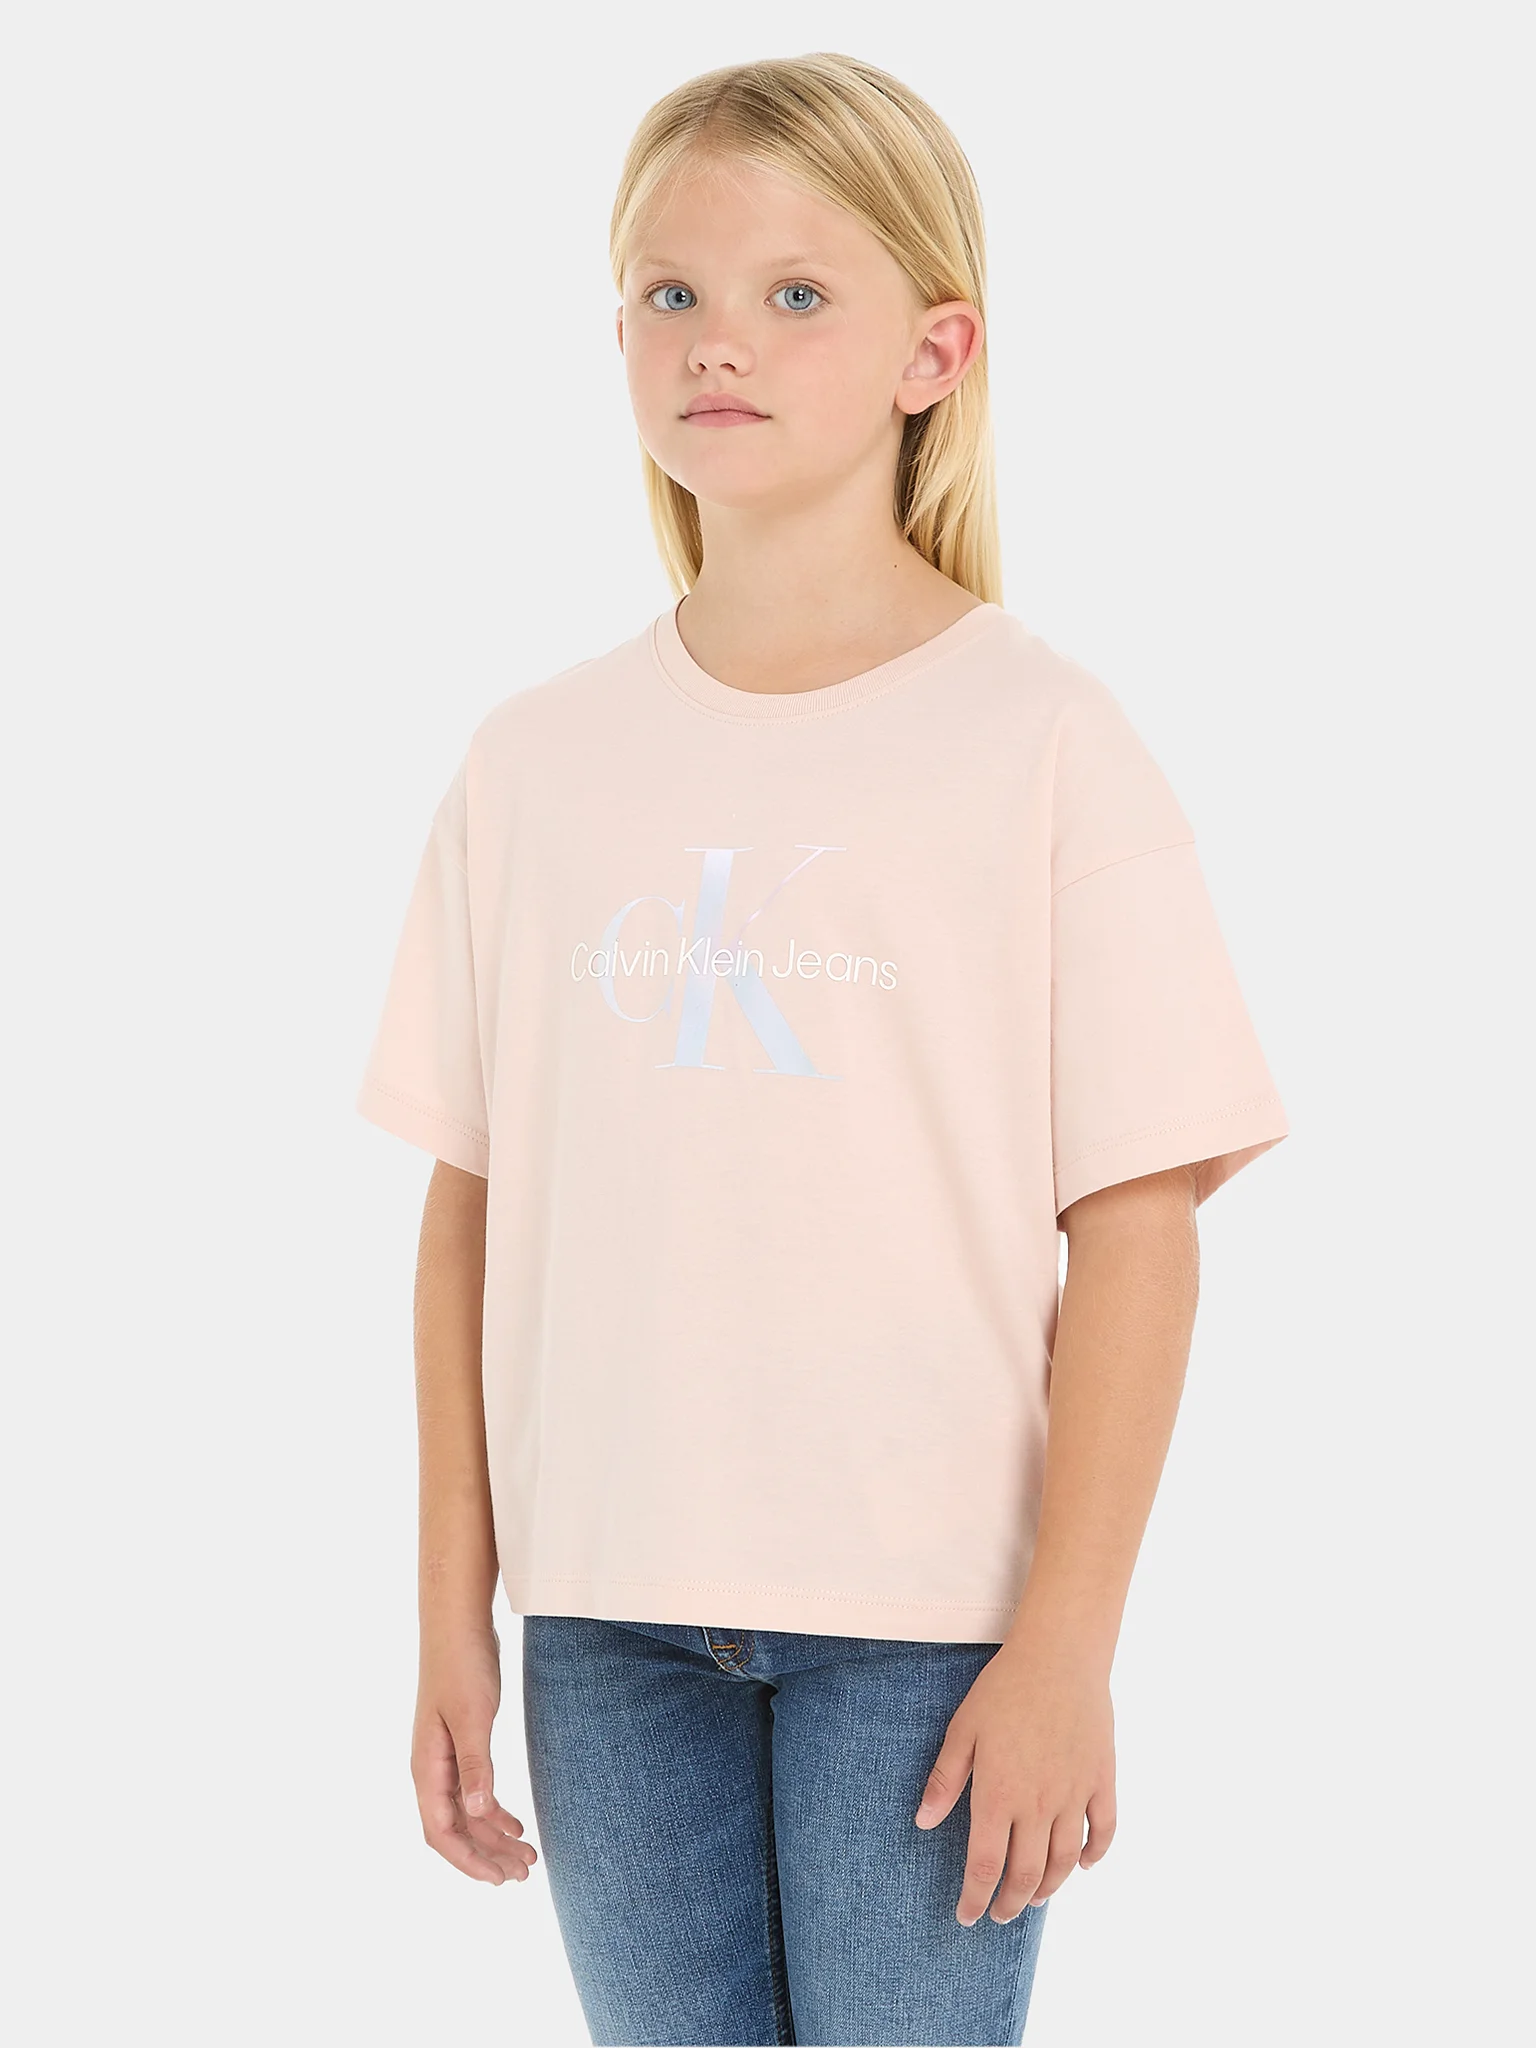 calvin-klein-jeans-t-shirt-serenity-ig0ig02434-rosa-boxy-fit-0000303409791